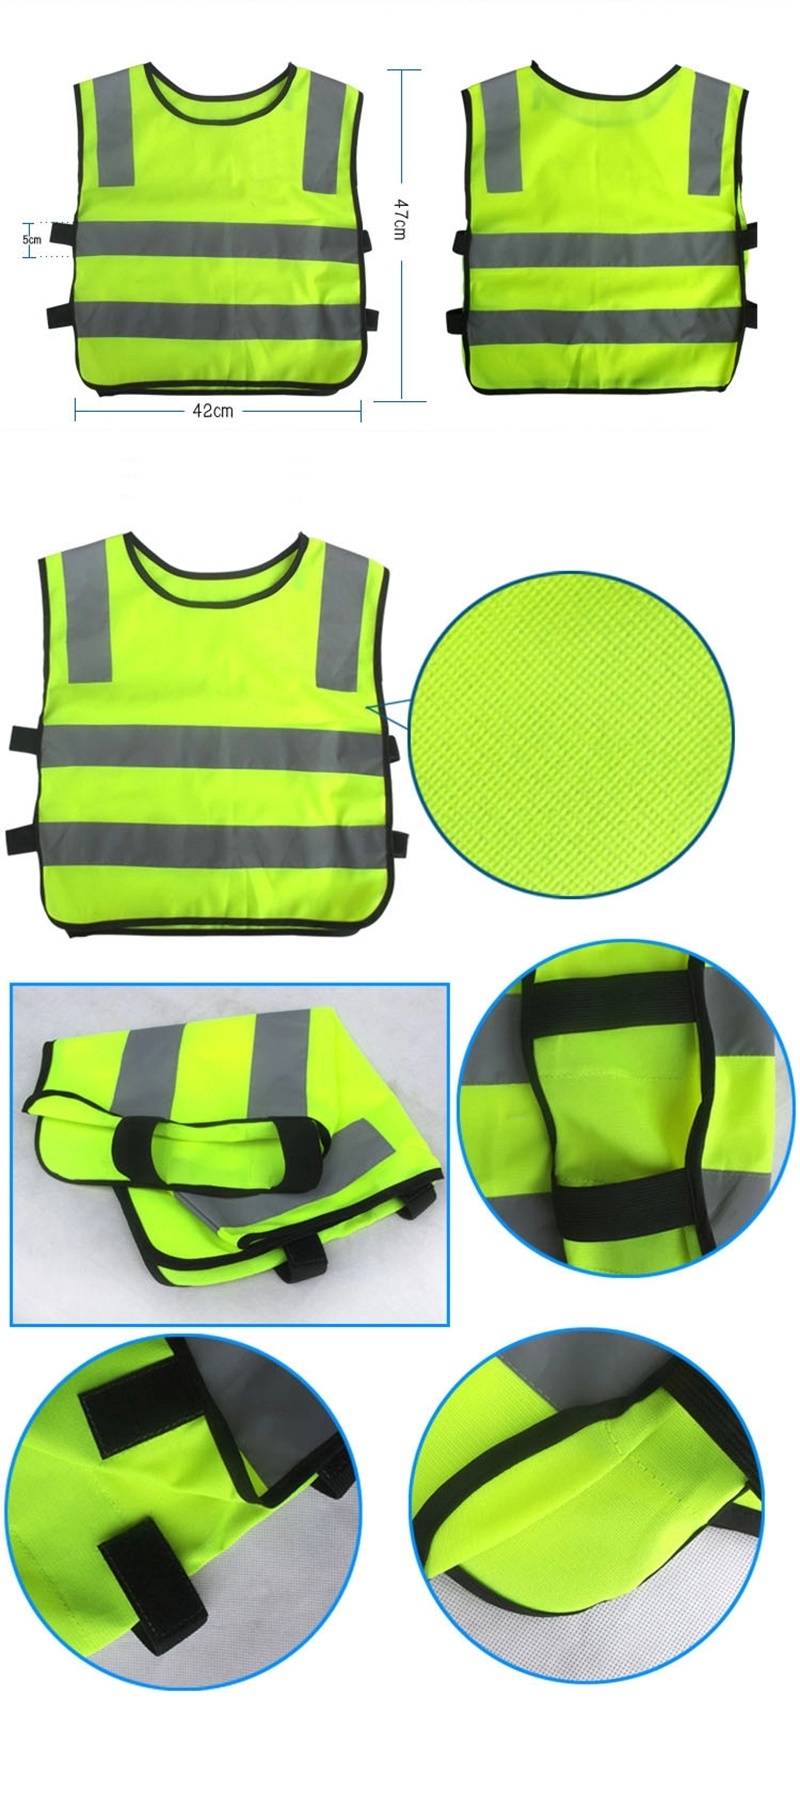 High Quality Polyester Kids Safety Vest Reflective Clothes for Child